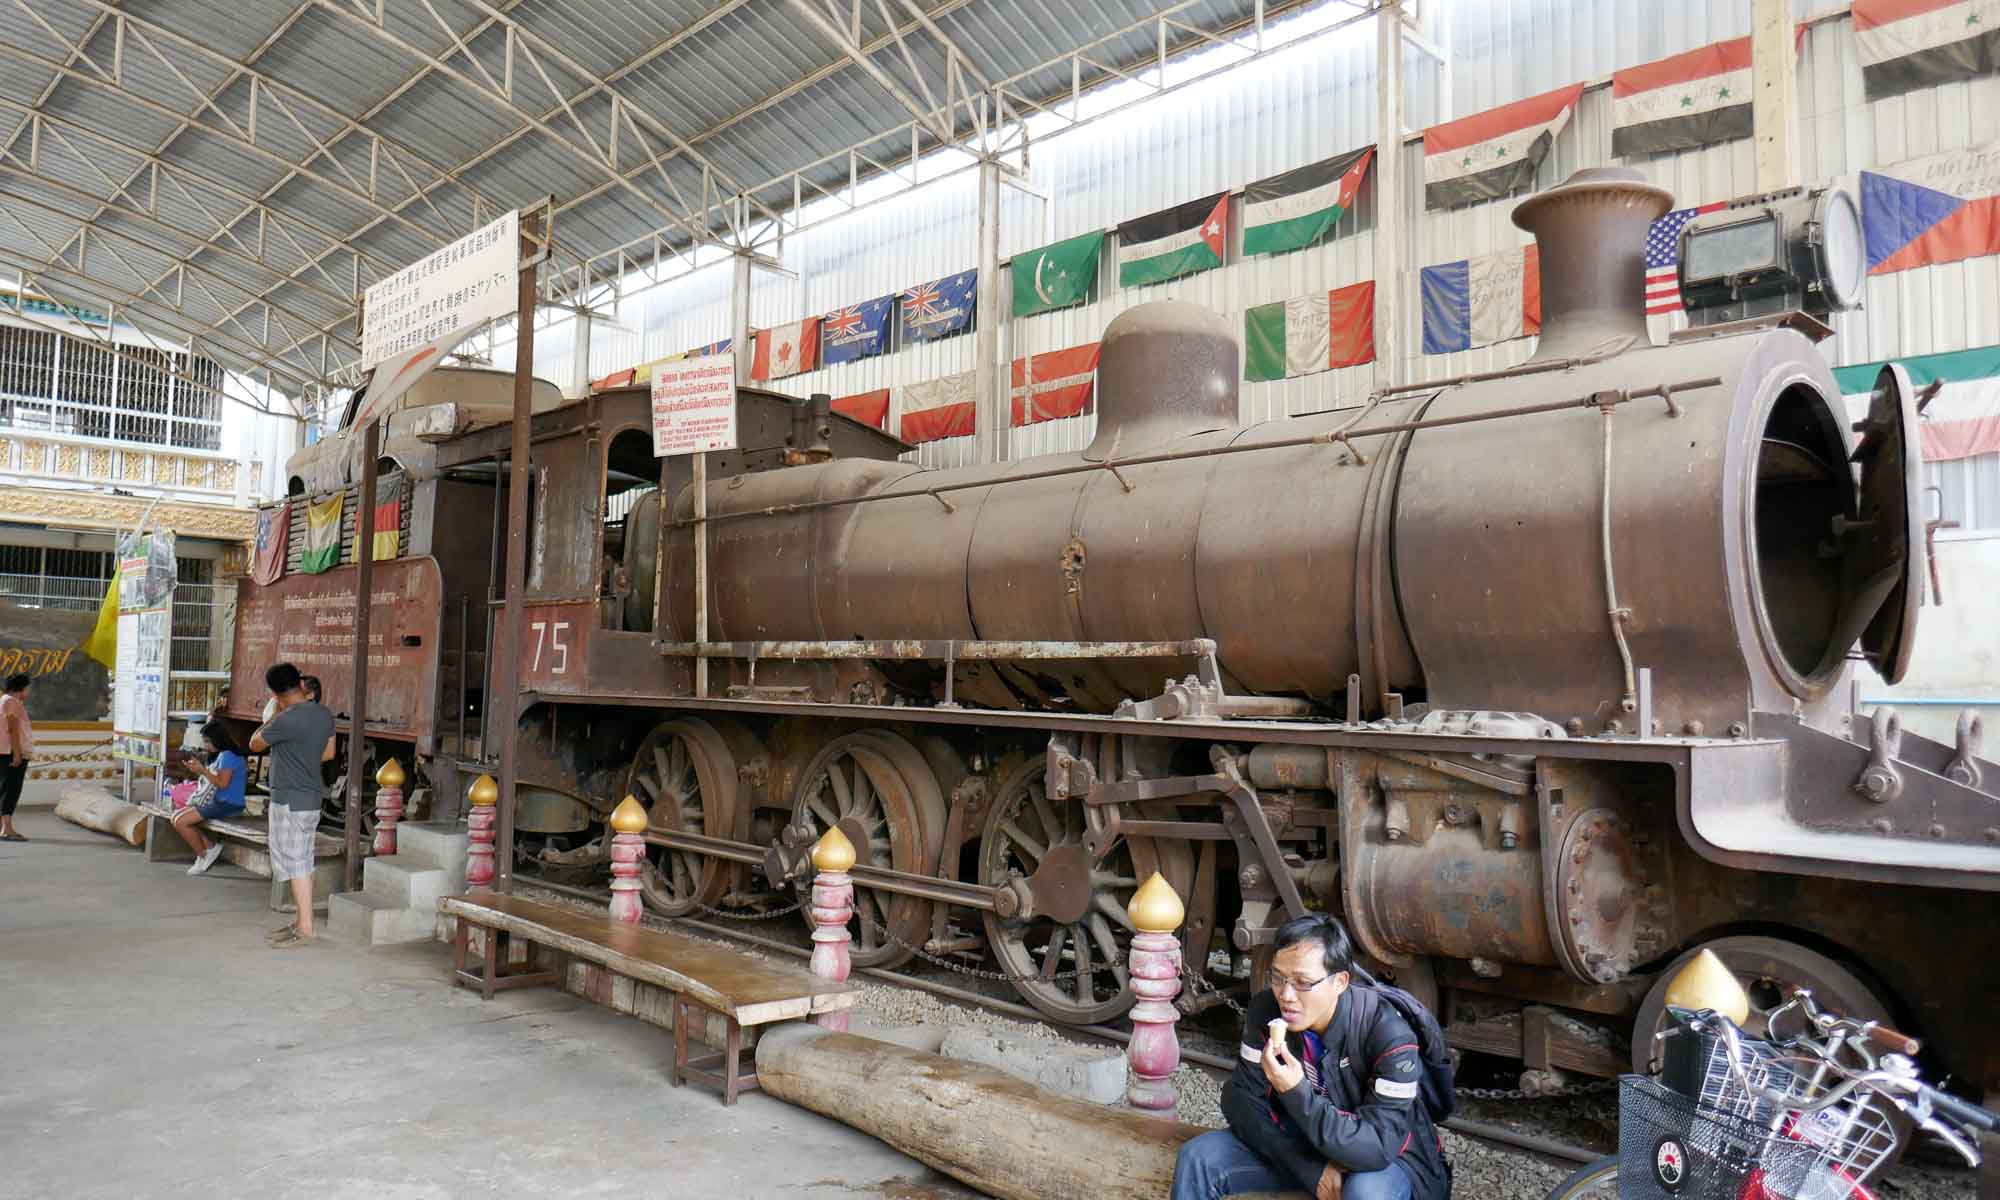 Old steam engine at entrance of Jeath Museum 2